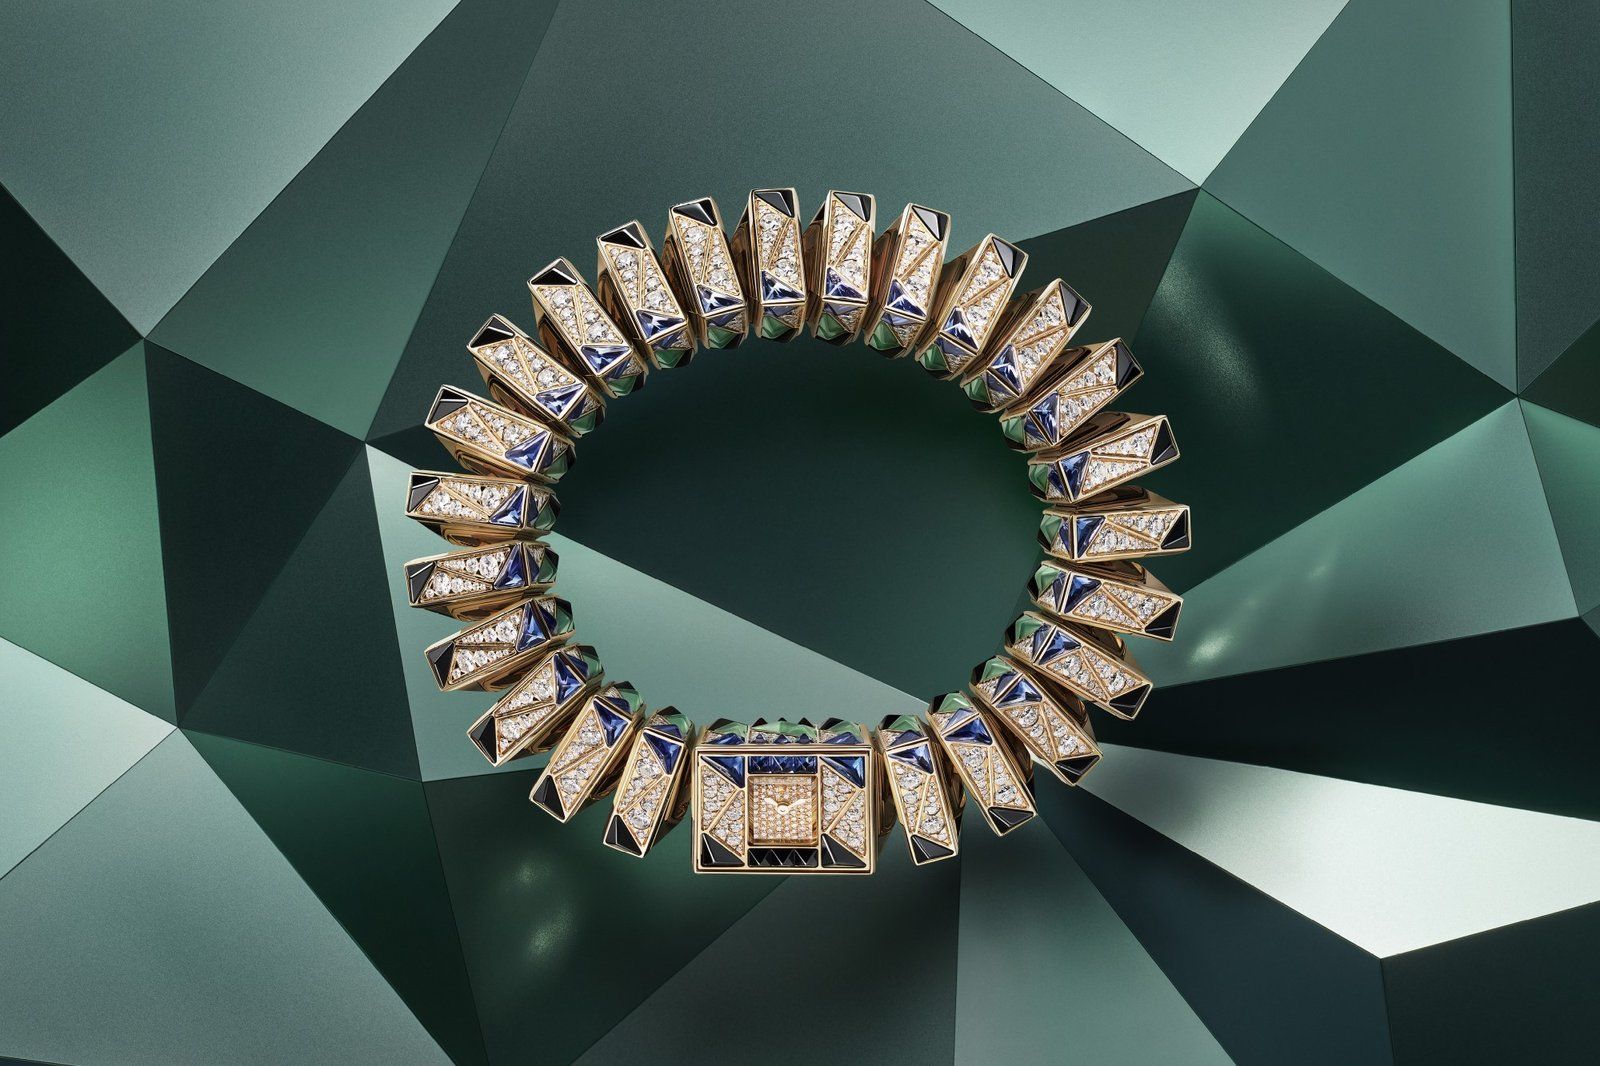 Cartier Libre featuring rose gold, black spinels, sapphires, emeralds, and diamonds